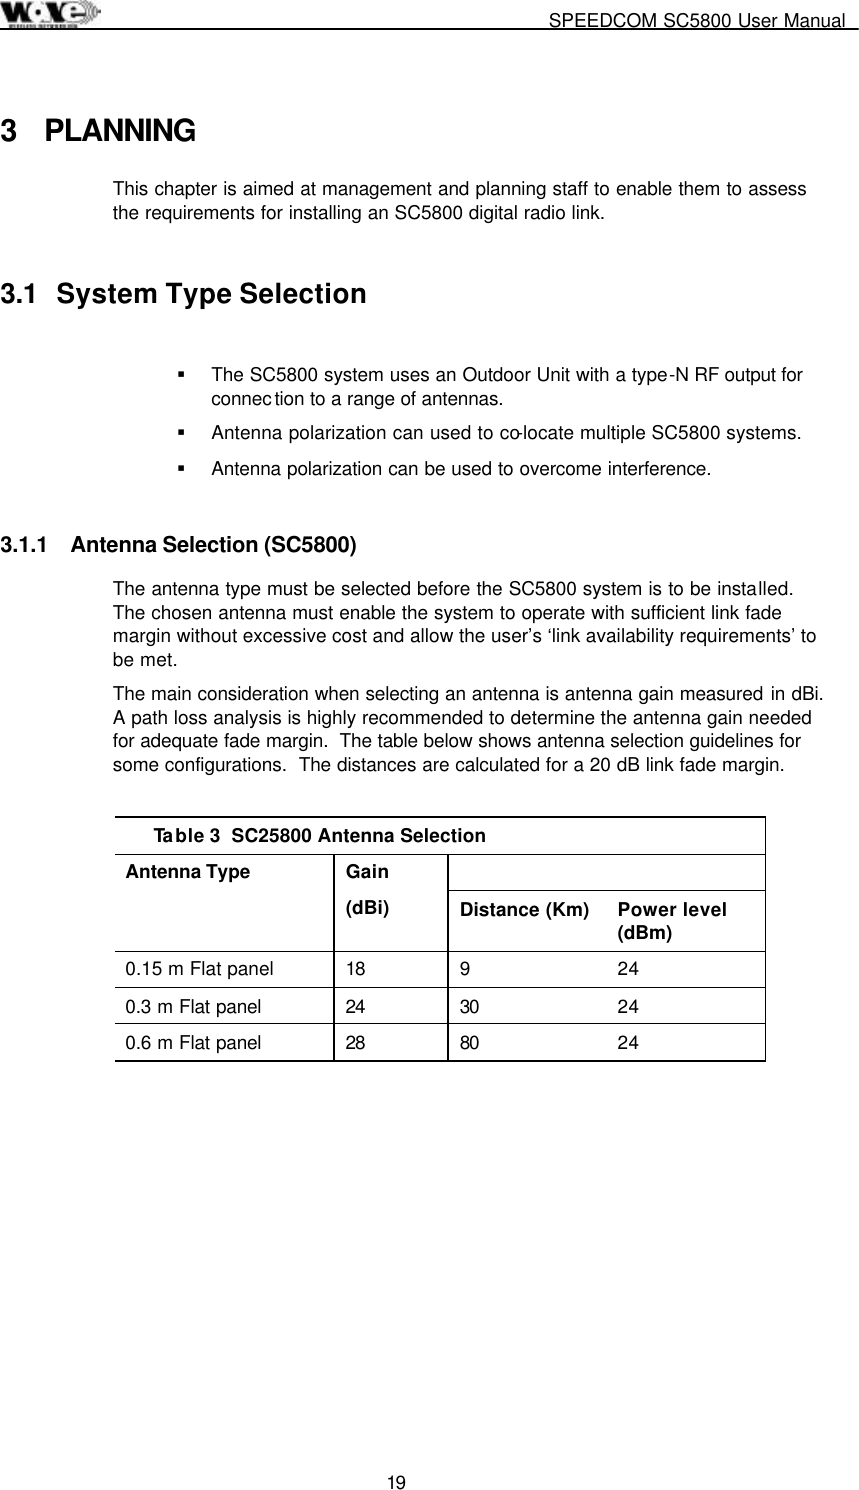     SPEEDCOM SC5800 User Manual  19  3 PLANNING This chapter is aimed at management and planning staff to enable them to assess the requirements for installing an SC5800 digital radio link. 3.1  System Type Selection  !  The SC5800 system uses an Outdoor Unit with a type-N RF output for connec tion to a range of antennas. !  Antenna polarization can used to co-locate multiple SC5800 systems. !  Antenna polarization can be used to overcome interference. 3.1.1  Antenna Selection (SC5800) The antenna type must be selected before the SC5800 system is to be installed.  The chosen antenna must enable the system to operate with sufficient link fade margin without excessive cost and allow the user’s ‘link availability requirements’ to be met.   The main consideration when selecting an antenna is antenna gain measured in dBi.  A path loss analysis is highly recommended to determine the antenna gain needed for adequate fade margin.  The table below shows antenna selection guidelines for some configurations.  The distances are calculated for a 20 dB link fade margin.  Table 3  SC25800 Antenna Selection  Antenna Type   Gain  (dBi)  Distance (Km)  Power level (dBm) 0.15 m Flat panel  18  9  24 0.3 m Flat panel  24  30  24 0.6 m Flat panel  28  80  24 